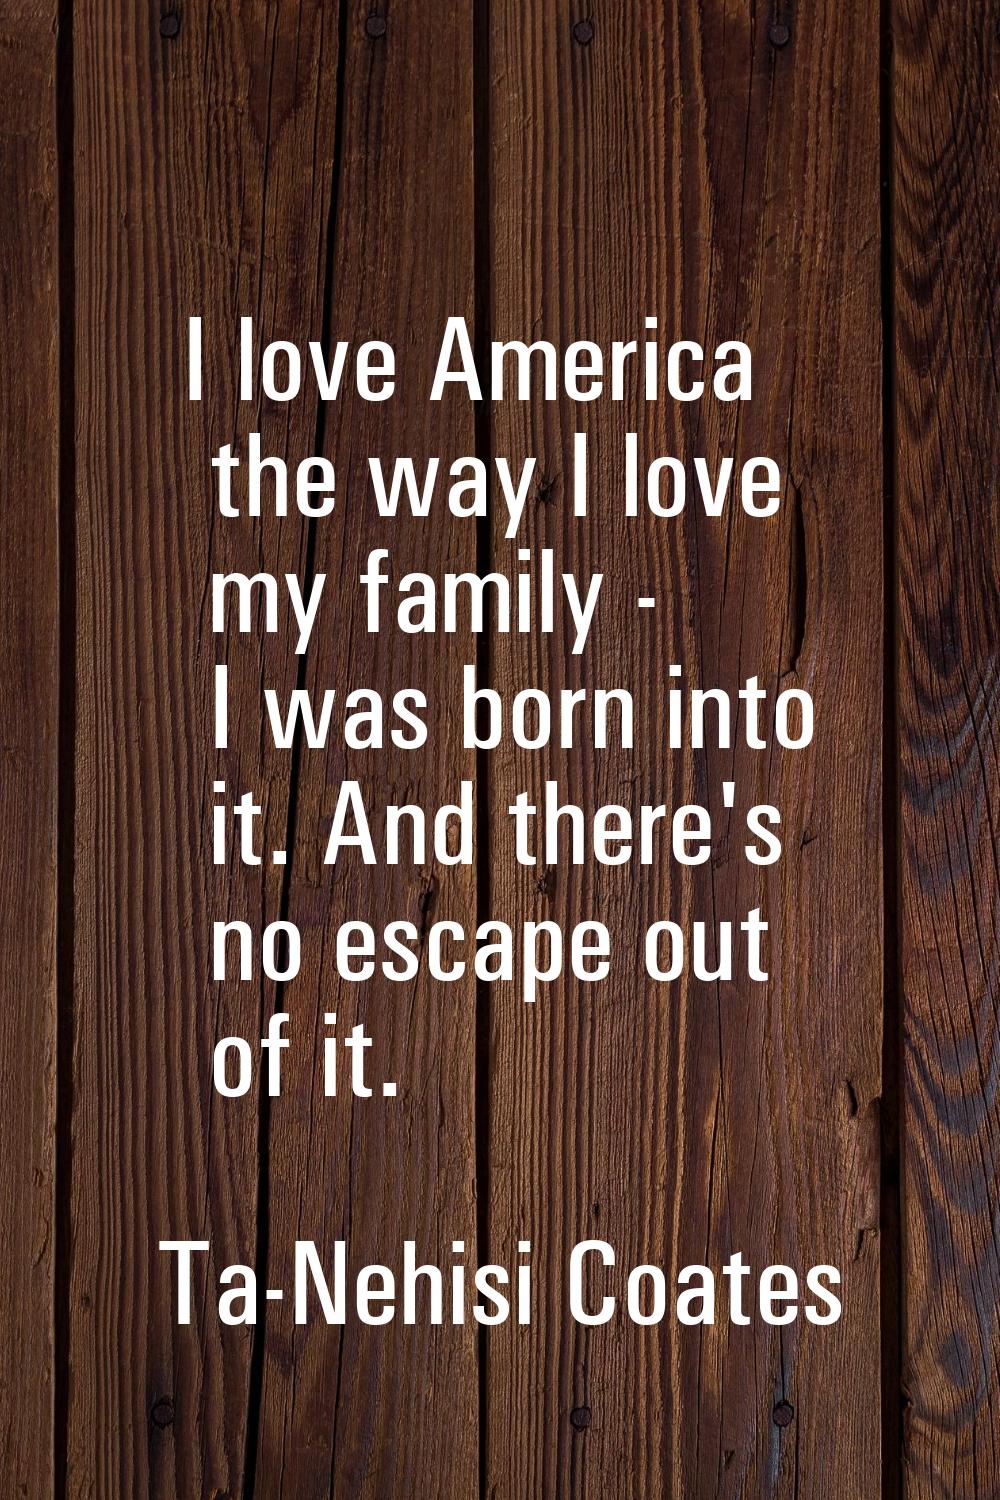 I love America the way I love my family - I was born into it. And there's no escape out of it.